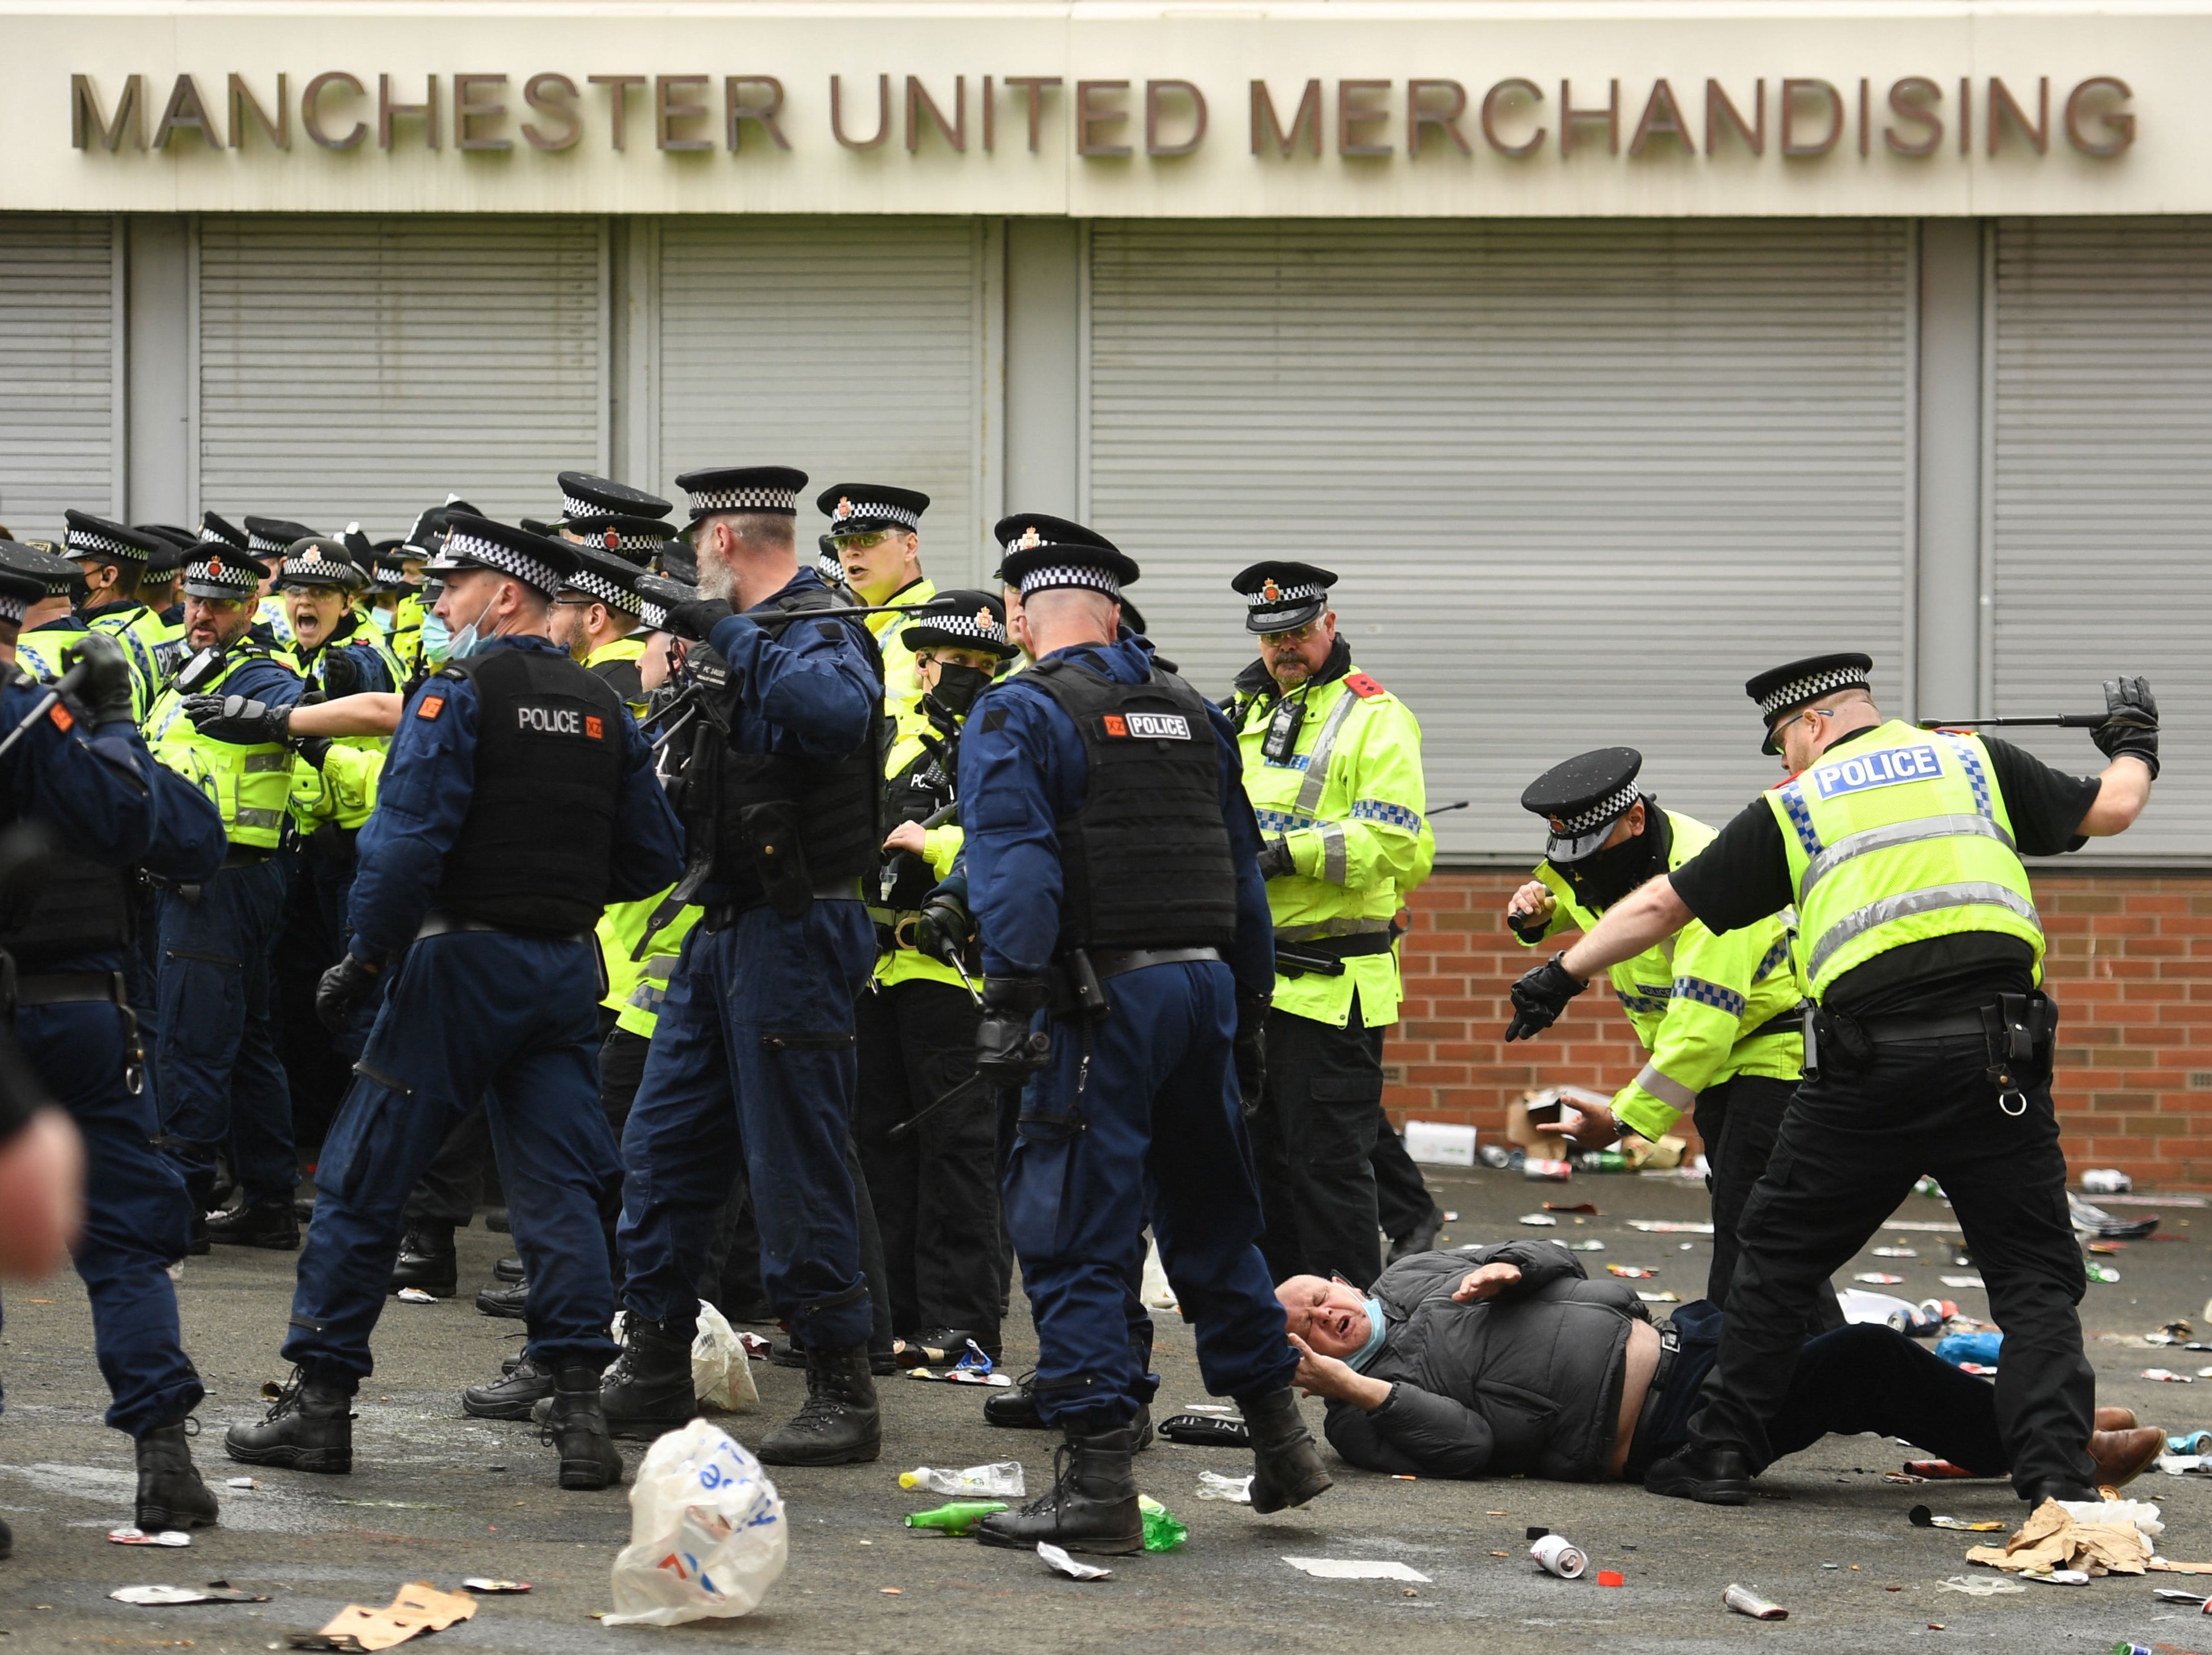 Police attempt to manage the situation outside Old Trafford